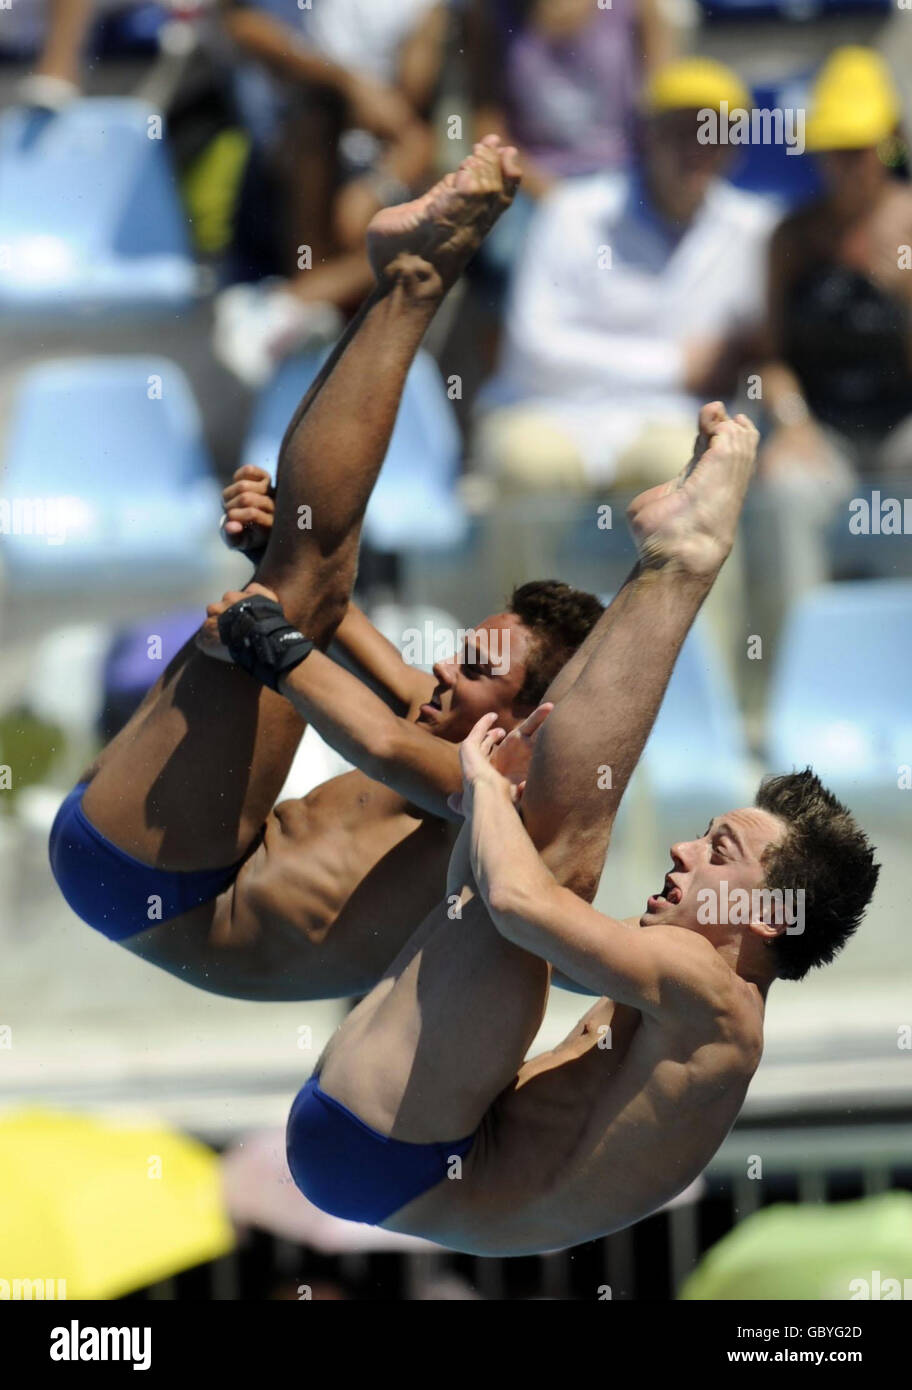 British divers Tom Daley (left) and Max Brick during the Men's 10m Synchronised Platform final during the FINA World Swimming Championships in Rome, Italy. Stock Photo